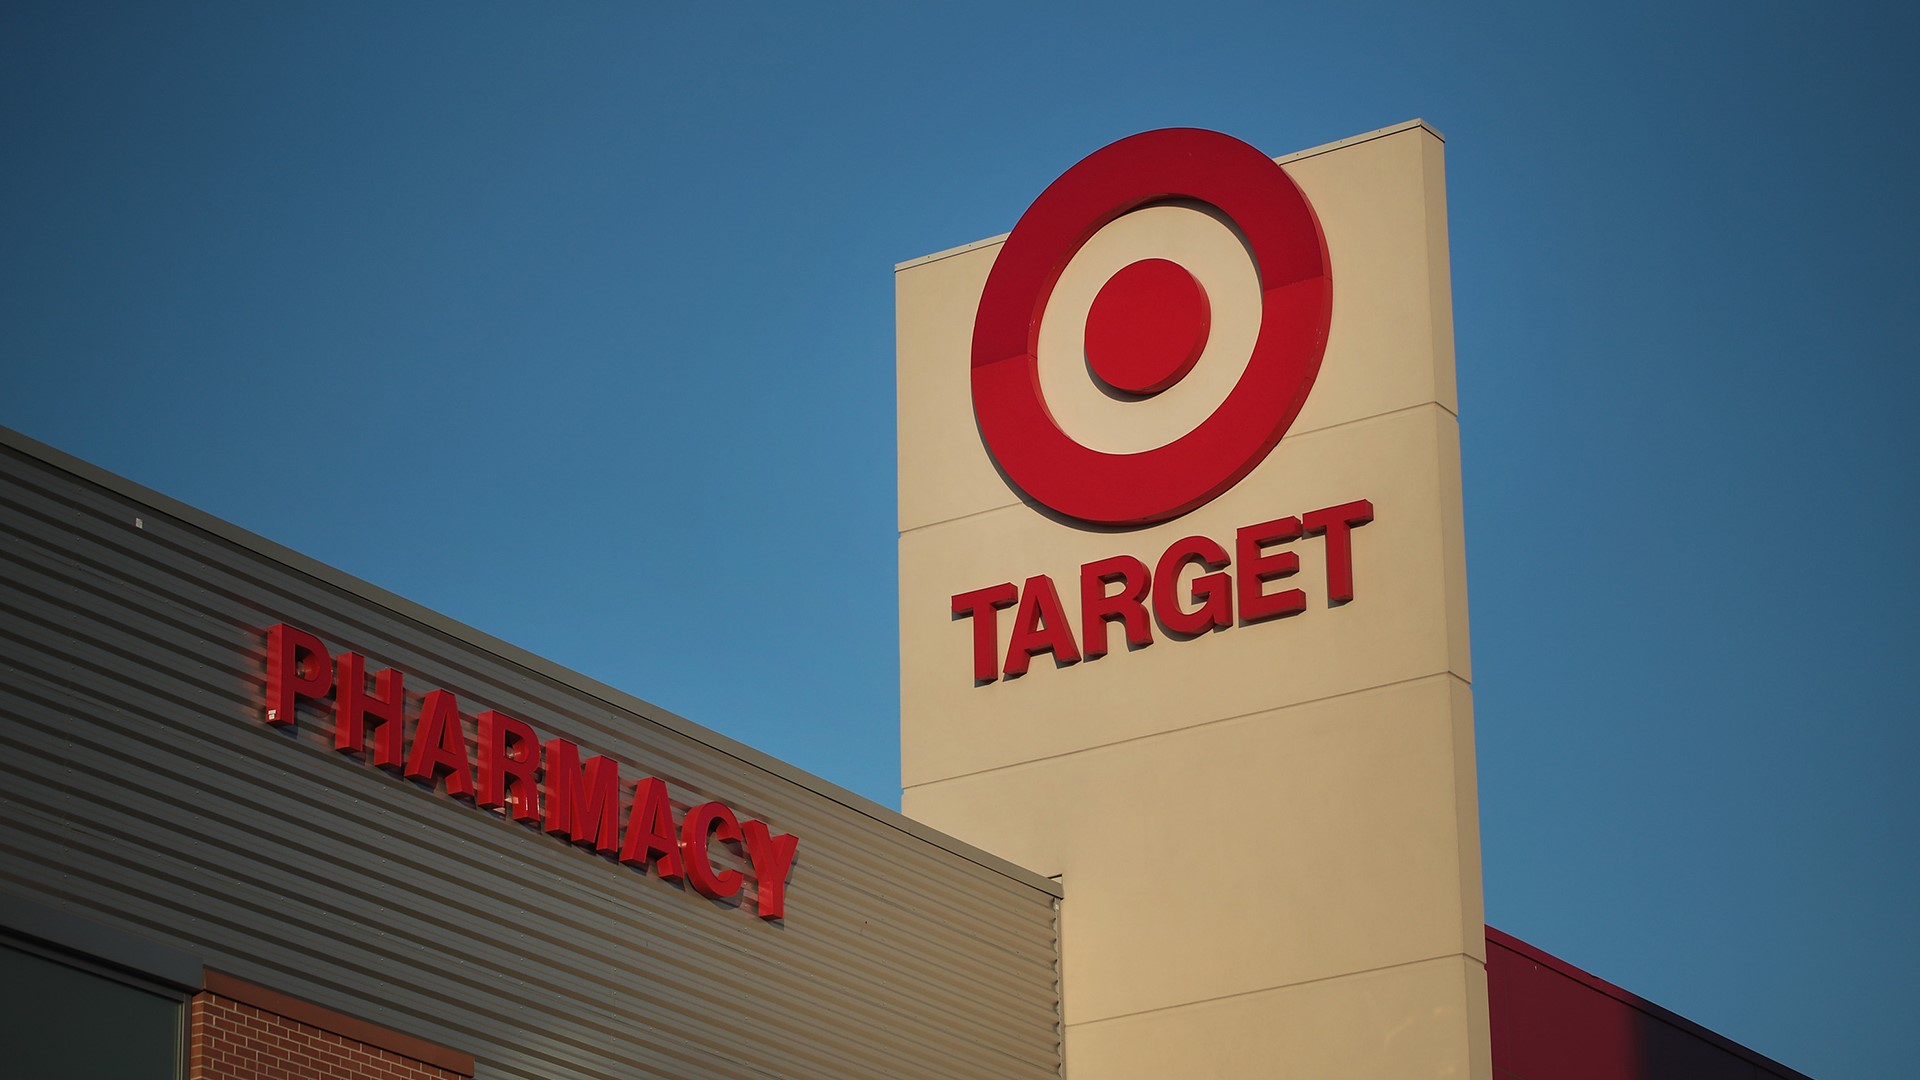 Target announced it will be changing its holiday plans for 2021. Instead of hiring an additional 30,000 seasonal workers, existing employees will work extra hours.